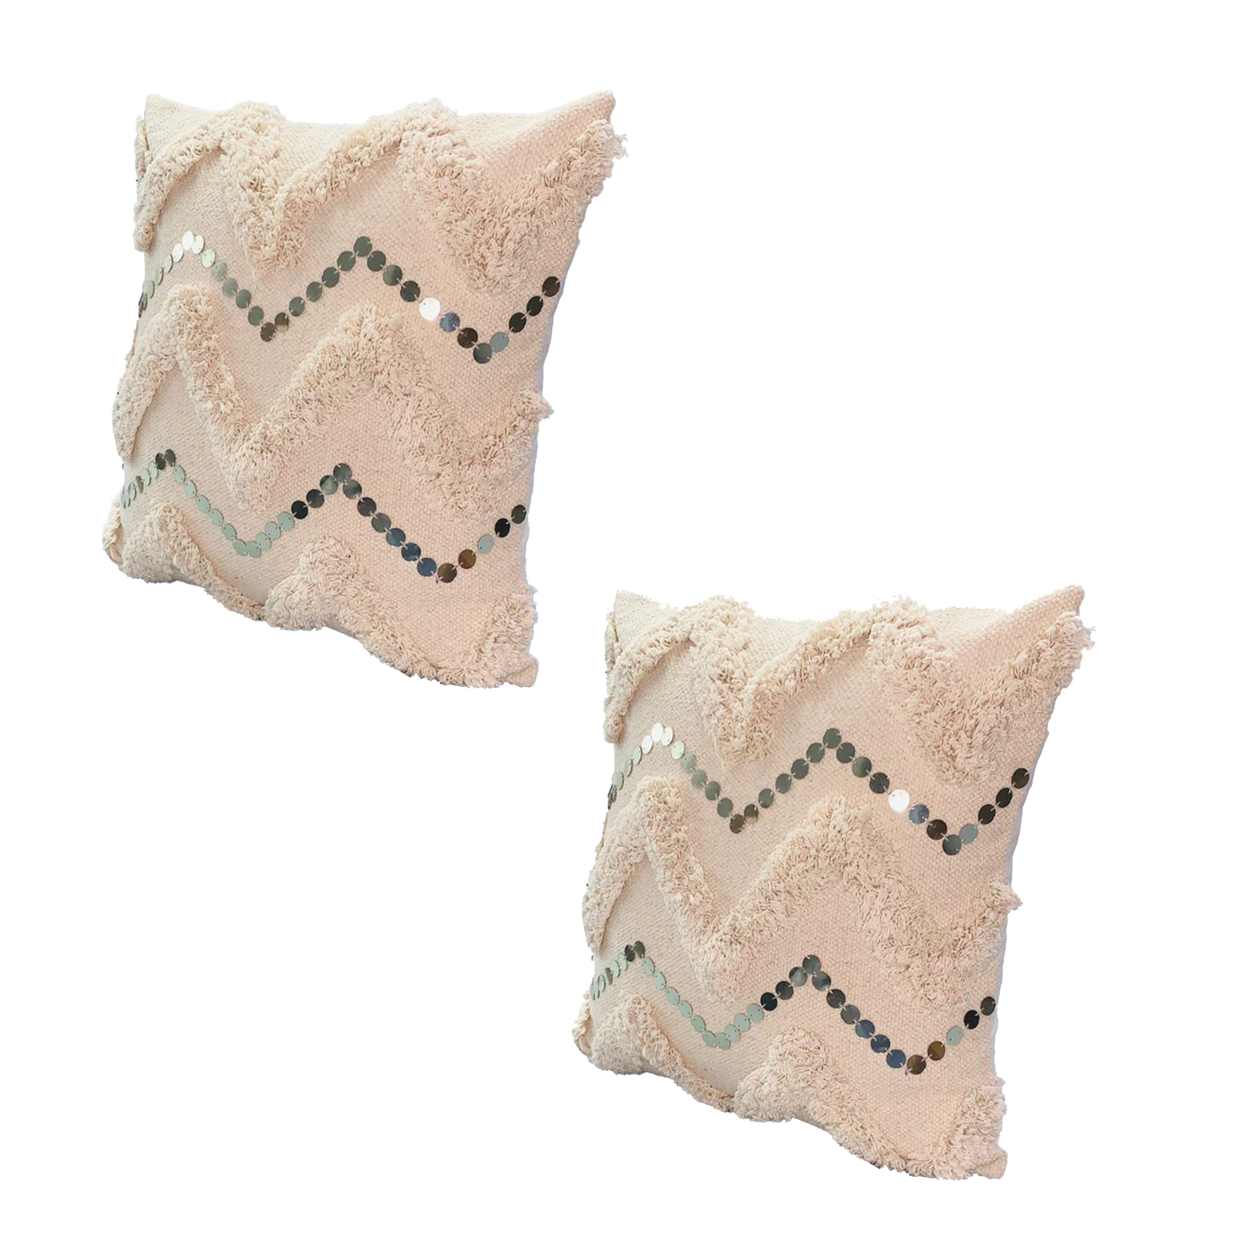 18 X 18 Square Cotton Accent Throw Pillow, Handcrafted Chevron Patchwork, Sequins, Set Of 2, Blush Pink